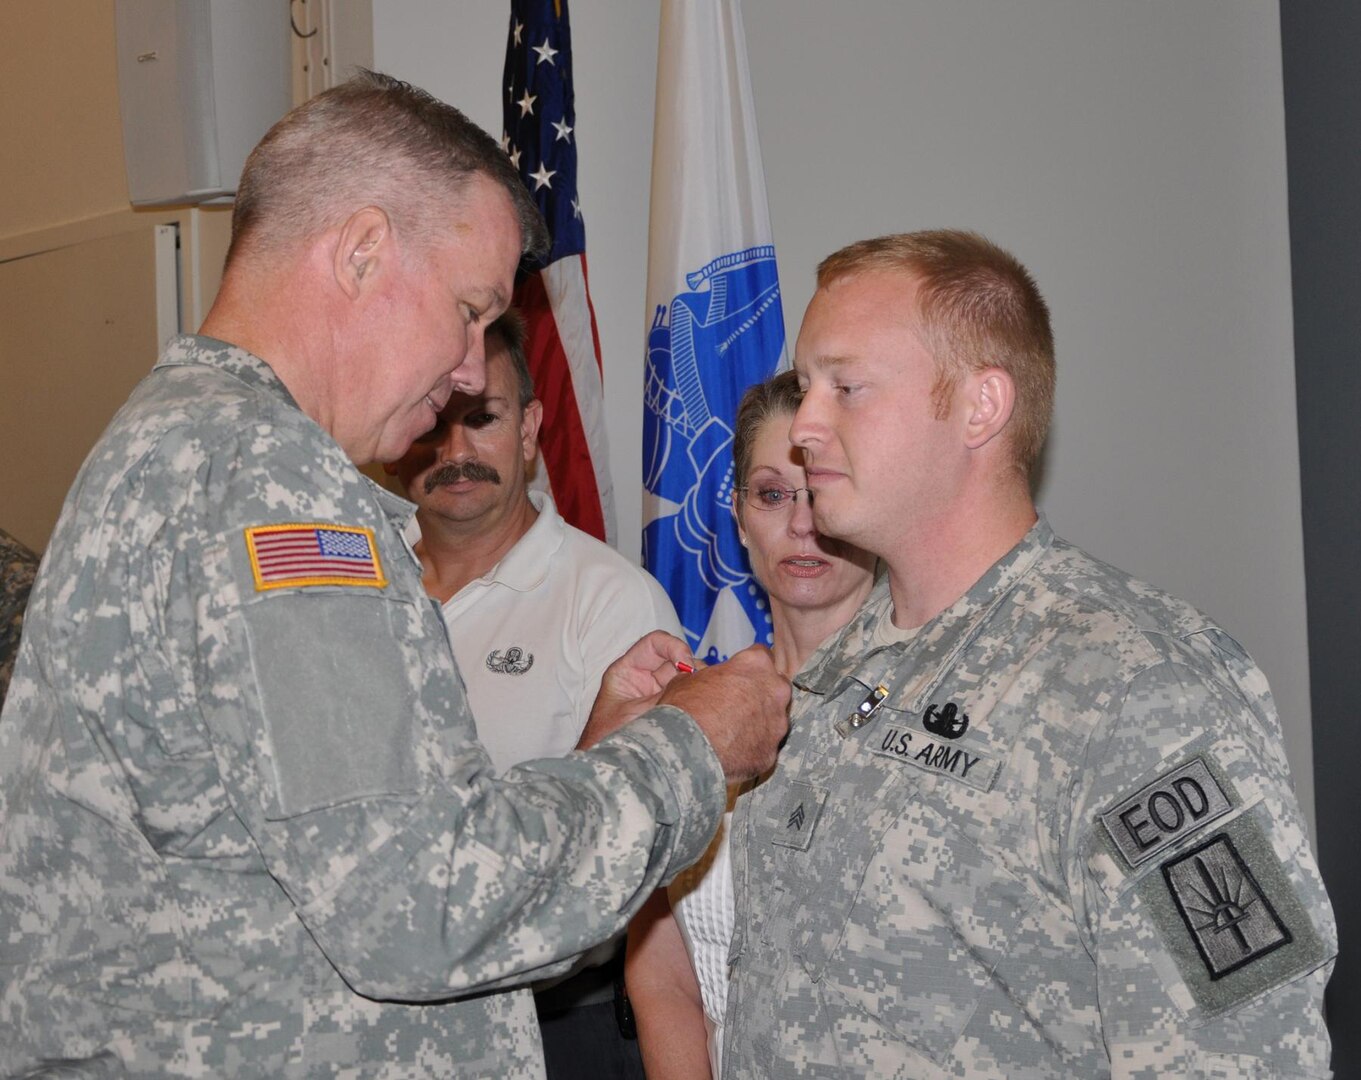 New York Army National Guard Sgt. Joshua Young, a member of the 1108th Ordnance Company (Explosive Ordnance Disposal), receives the Bronze Star with V device for valor during a ceremony at the Scotia-Glenville, N.Y., Armed Forces Reserve Center, July 19, 2013.